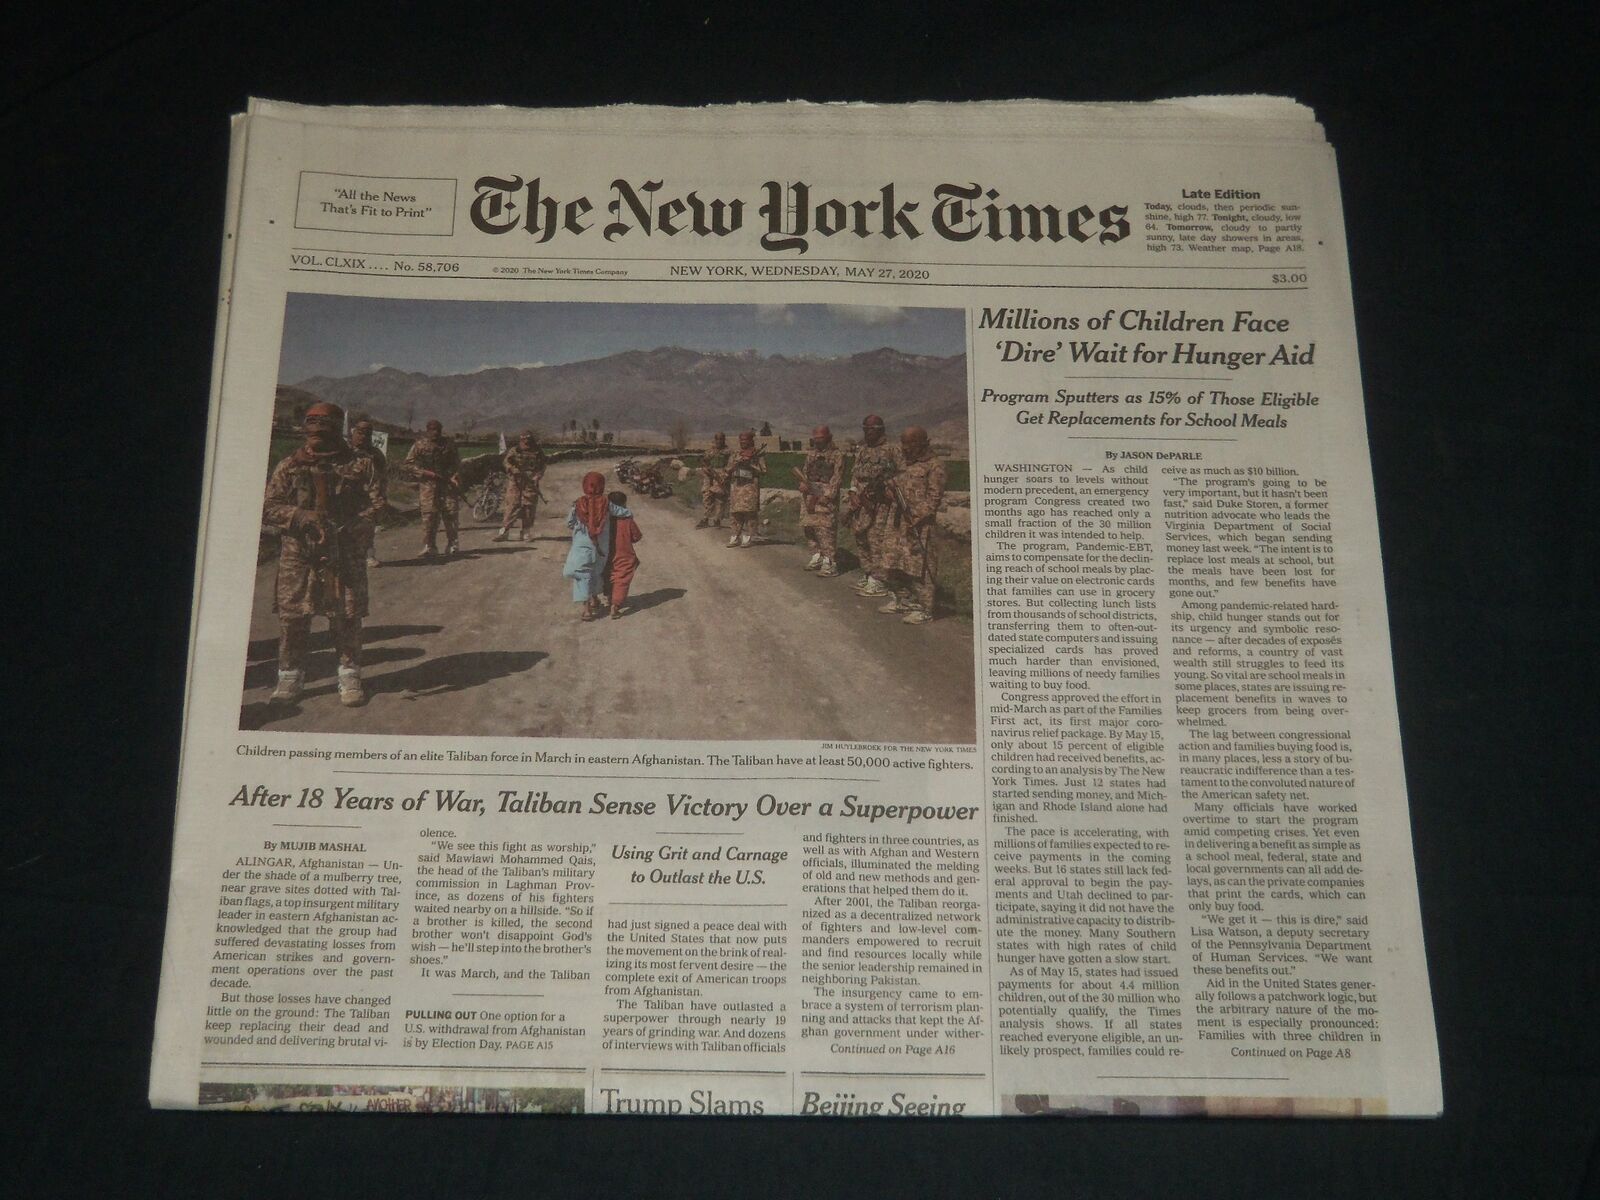 2020 MAY 27 NEW YORK TIMES - MILLIONS OF CHILDREN FACE DIRE WAIT FOR HUNGER AID